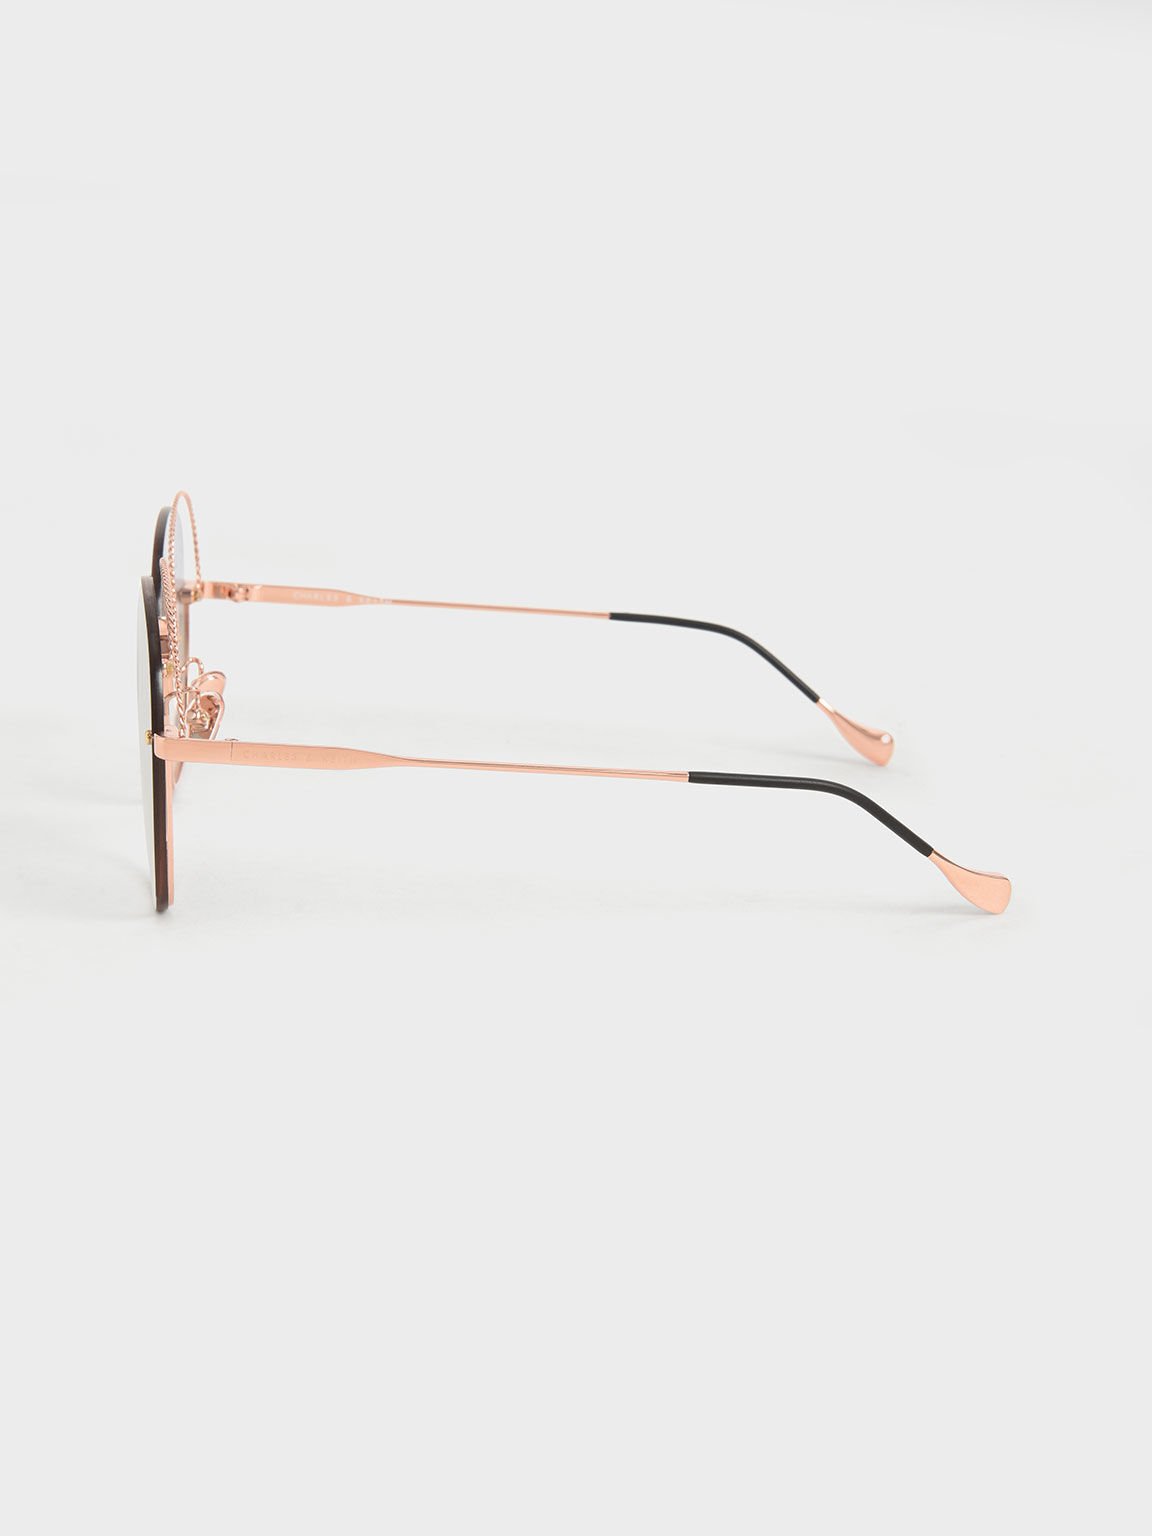 Multi-Tinted Cut-Out Butterfly Sunglasses, Rose Gold, hi-res